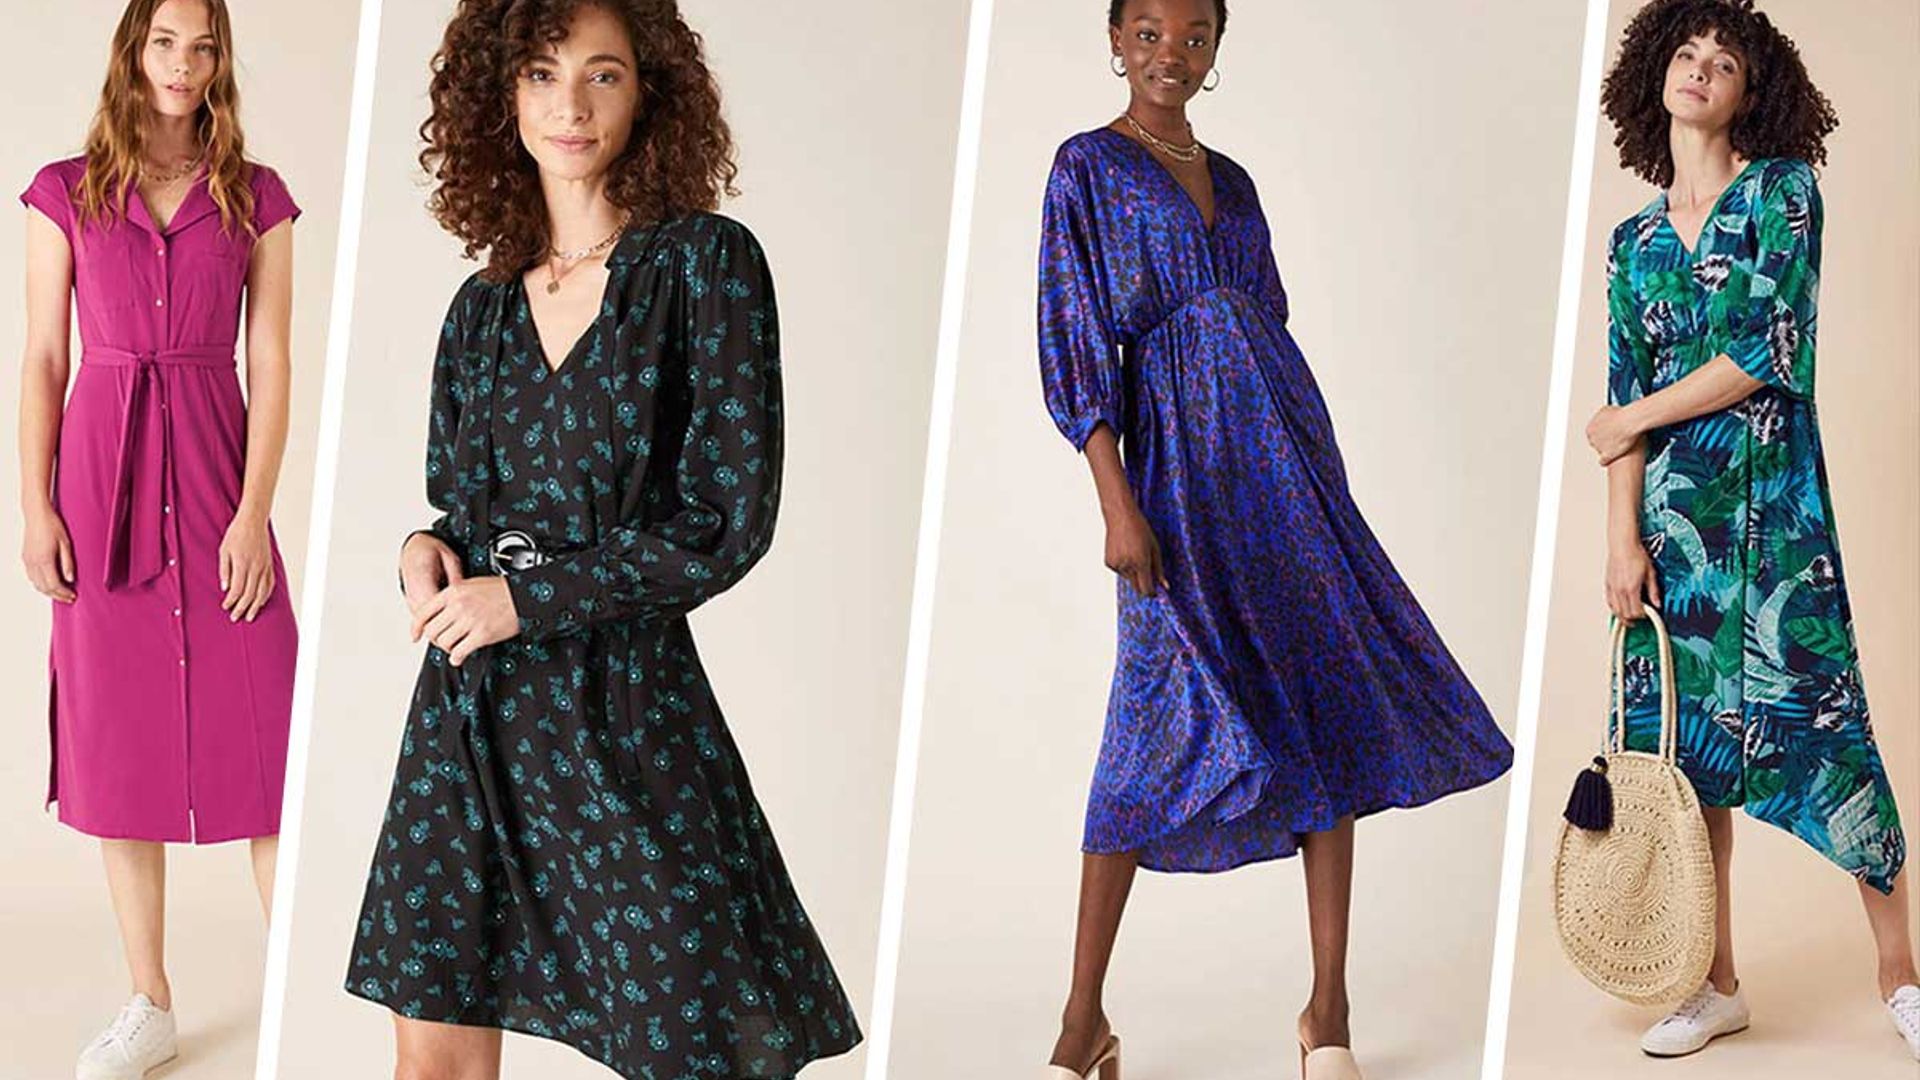 Monsoon is selling the dreamiest dresses for £20 and under – yes, really.